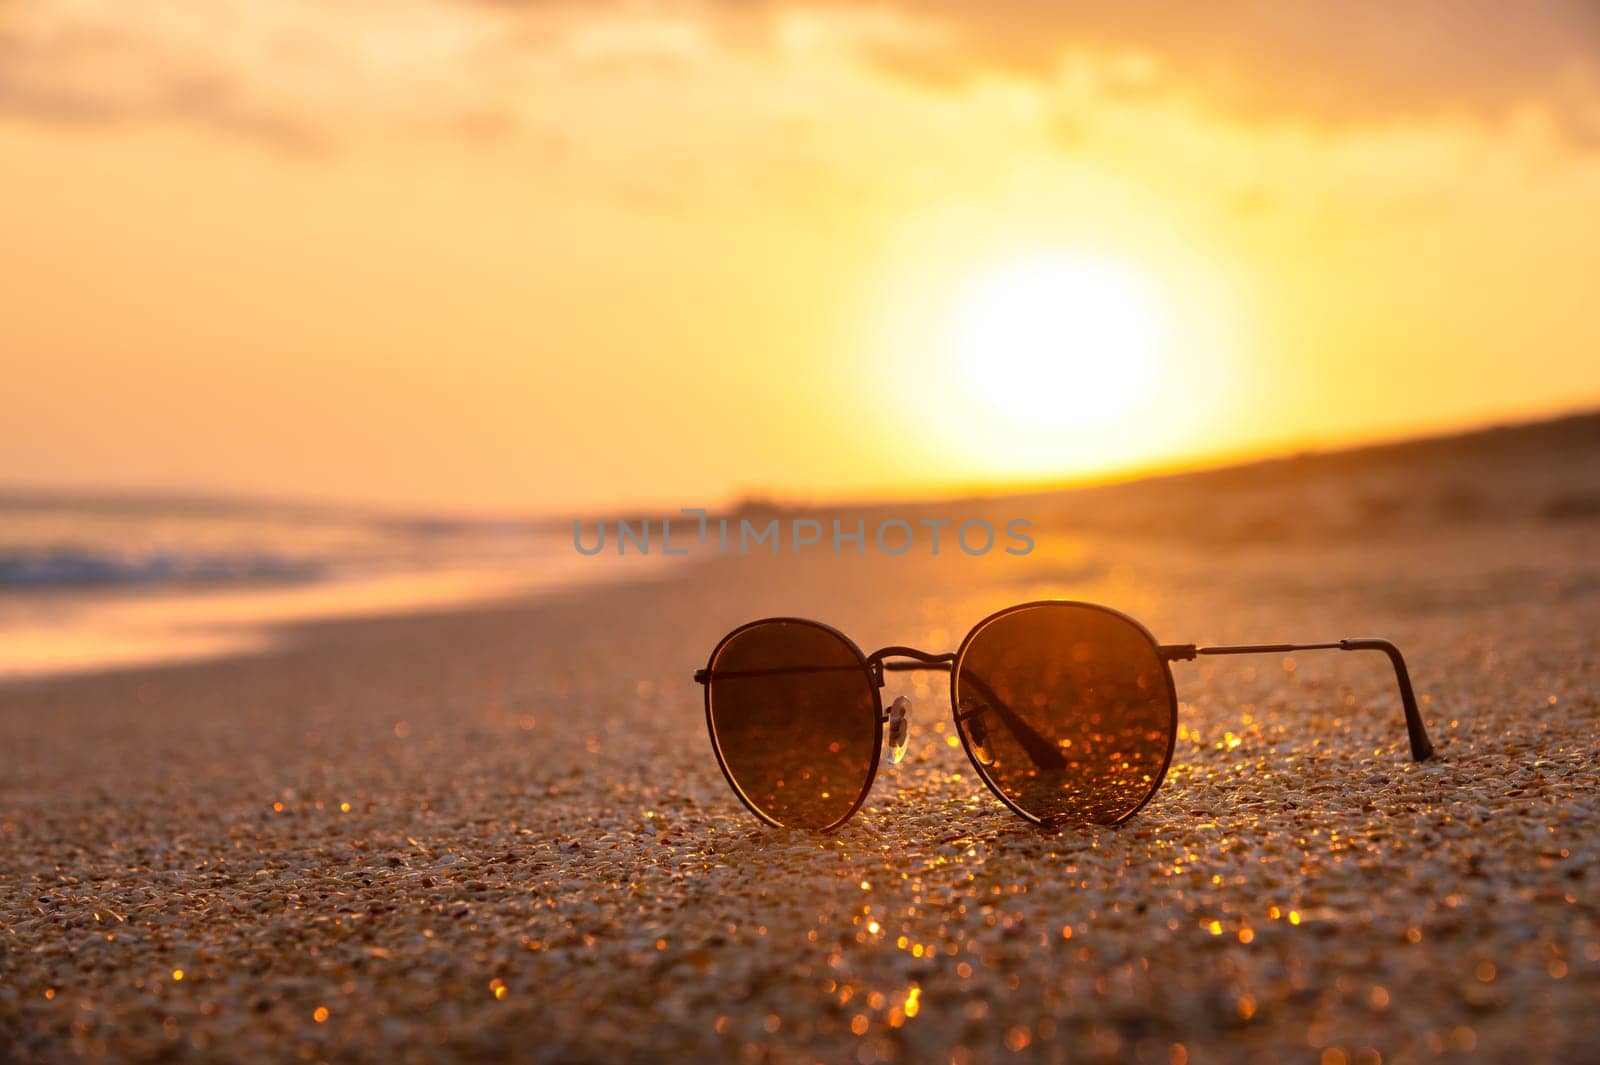 Mirrored sunglasses lie on a sandy beach. Close-up of sunglasses, beautiful trendy sunglasses located on the floor of the beach and blurred sea background by yanik88